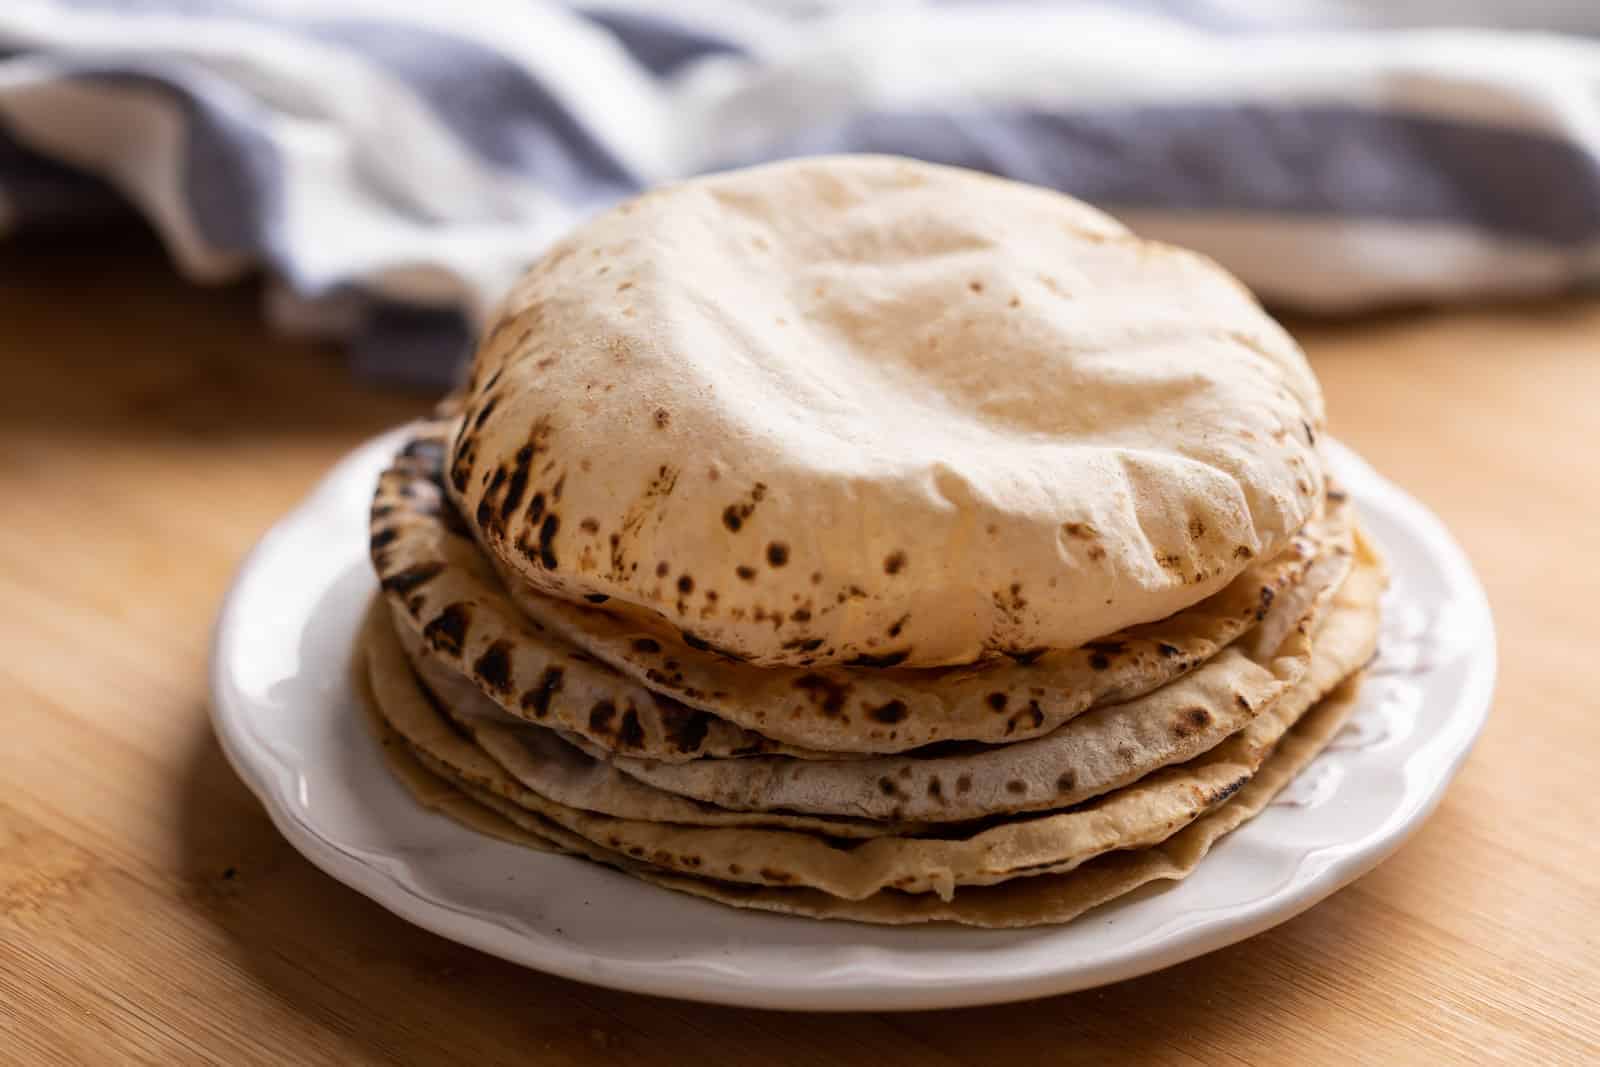 https://myfoodstory.com/wp-content/uploads/2020/04/Soft-Rotis-How-to-make-them-at-home-4.jpg